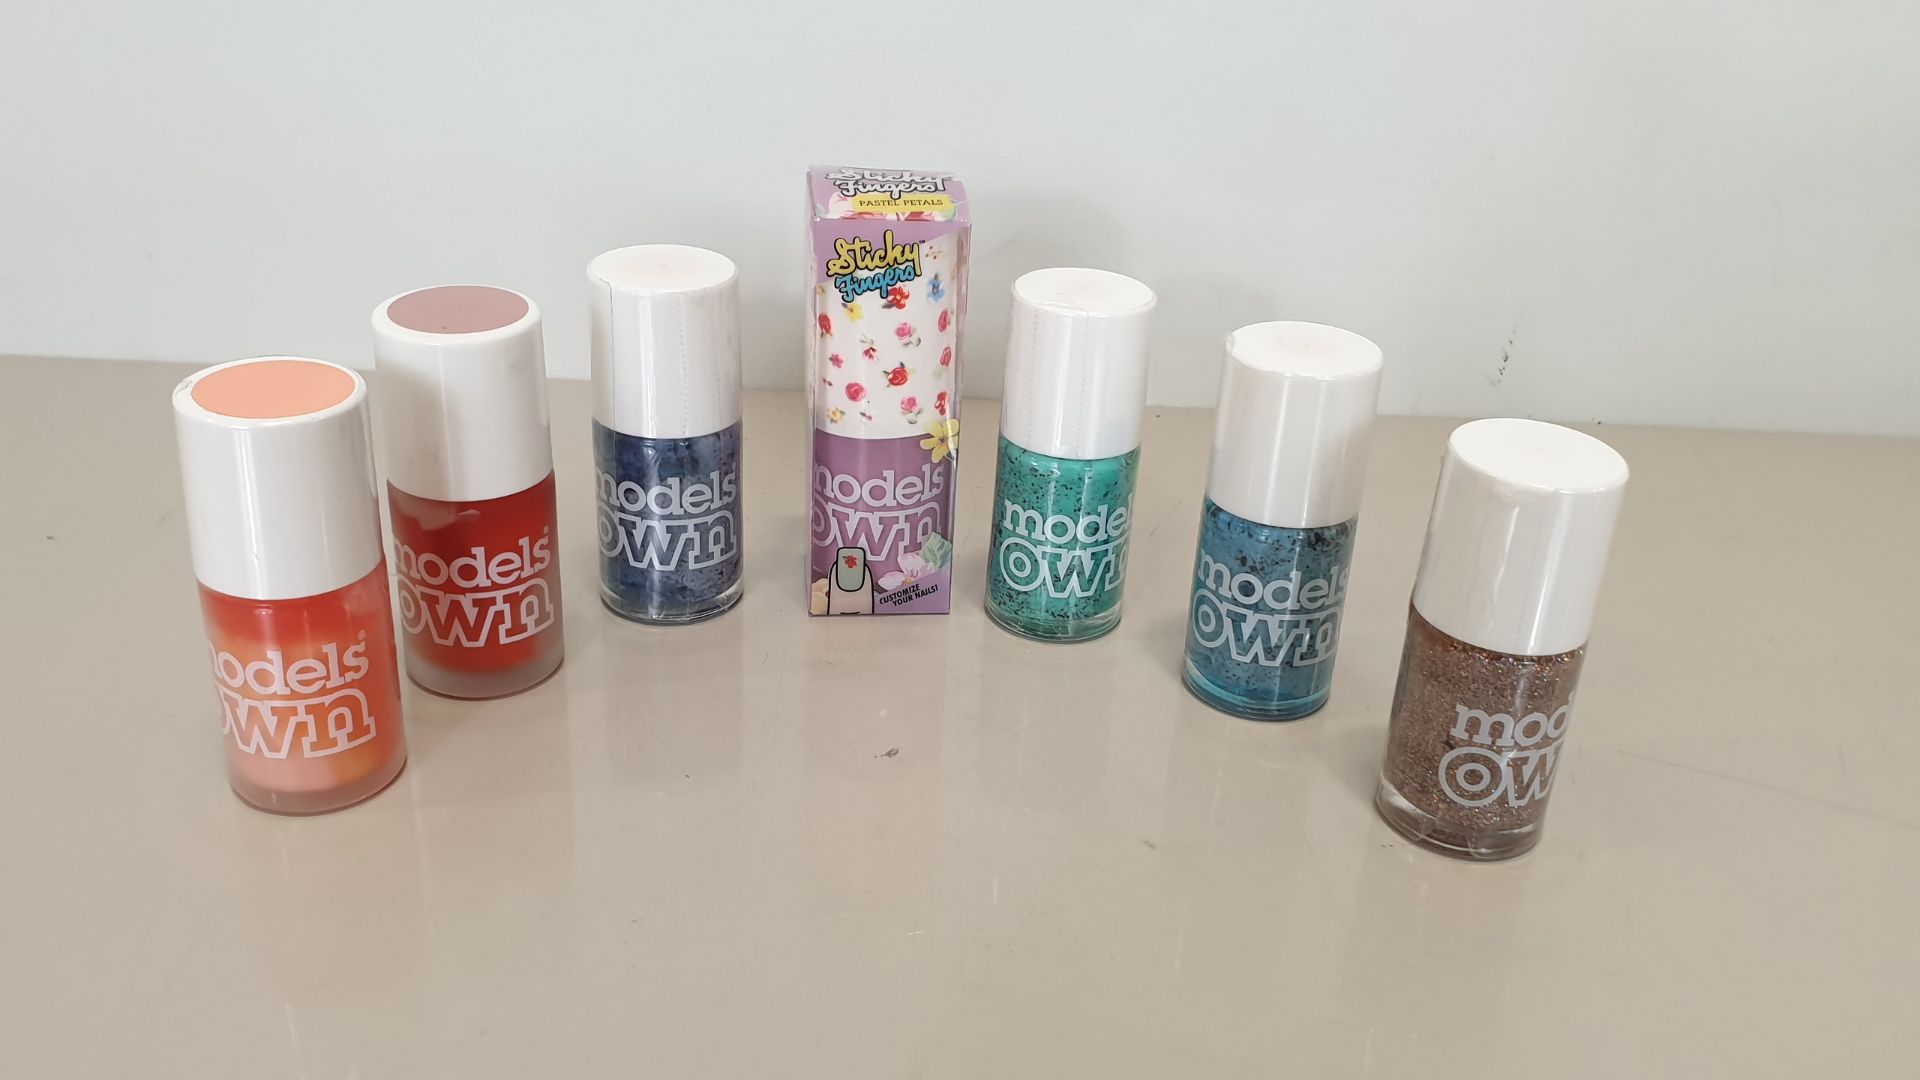 241X BRAND NEW MODELS OWN NAIL POLISH IN BLUE, RED AND YELLOW ORANGE, BLUE AND MINT IN 3 BAGS